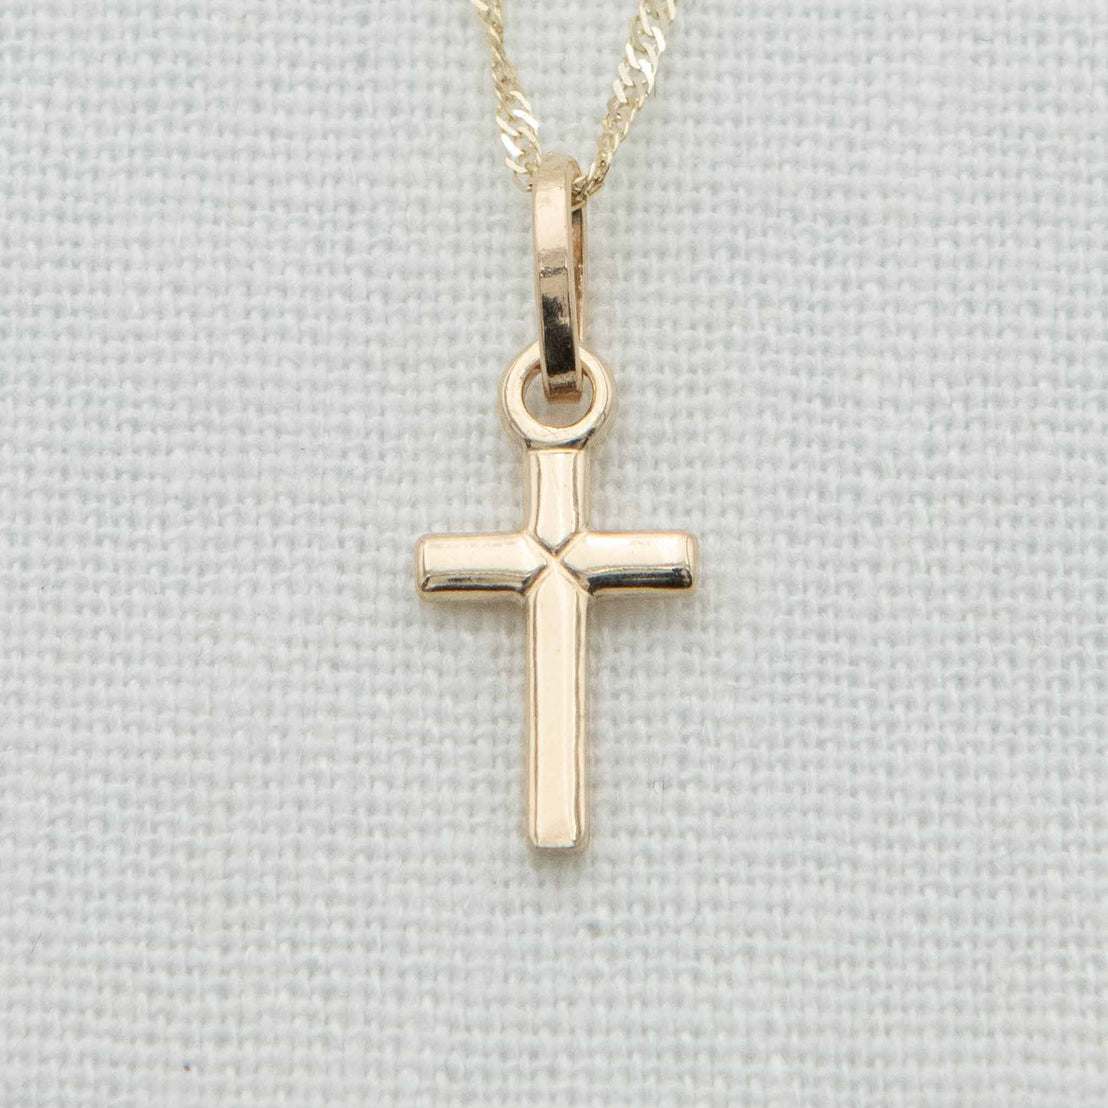 Small cross charm on chain with lace